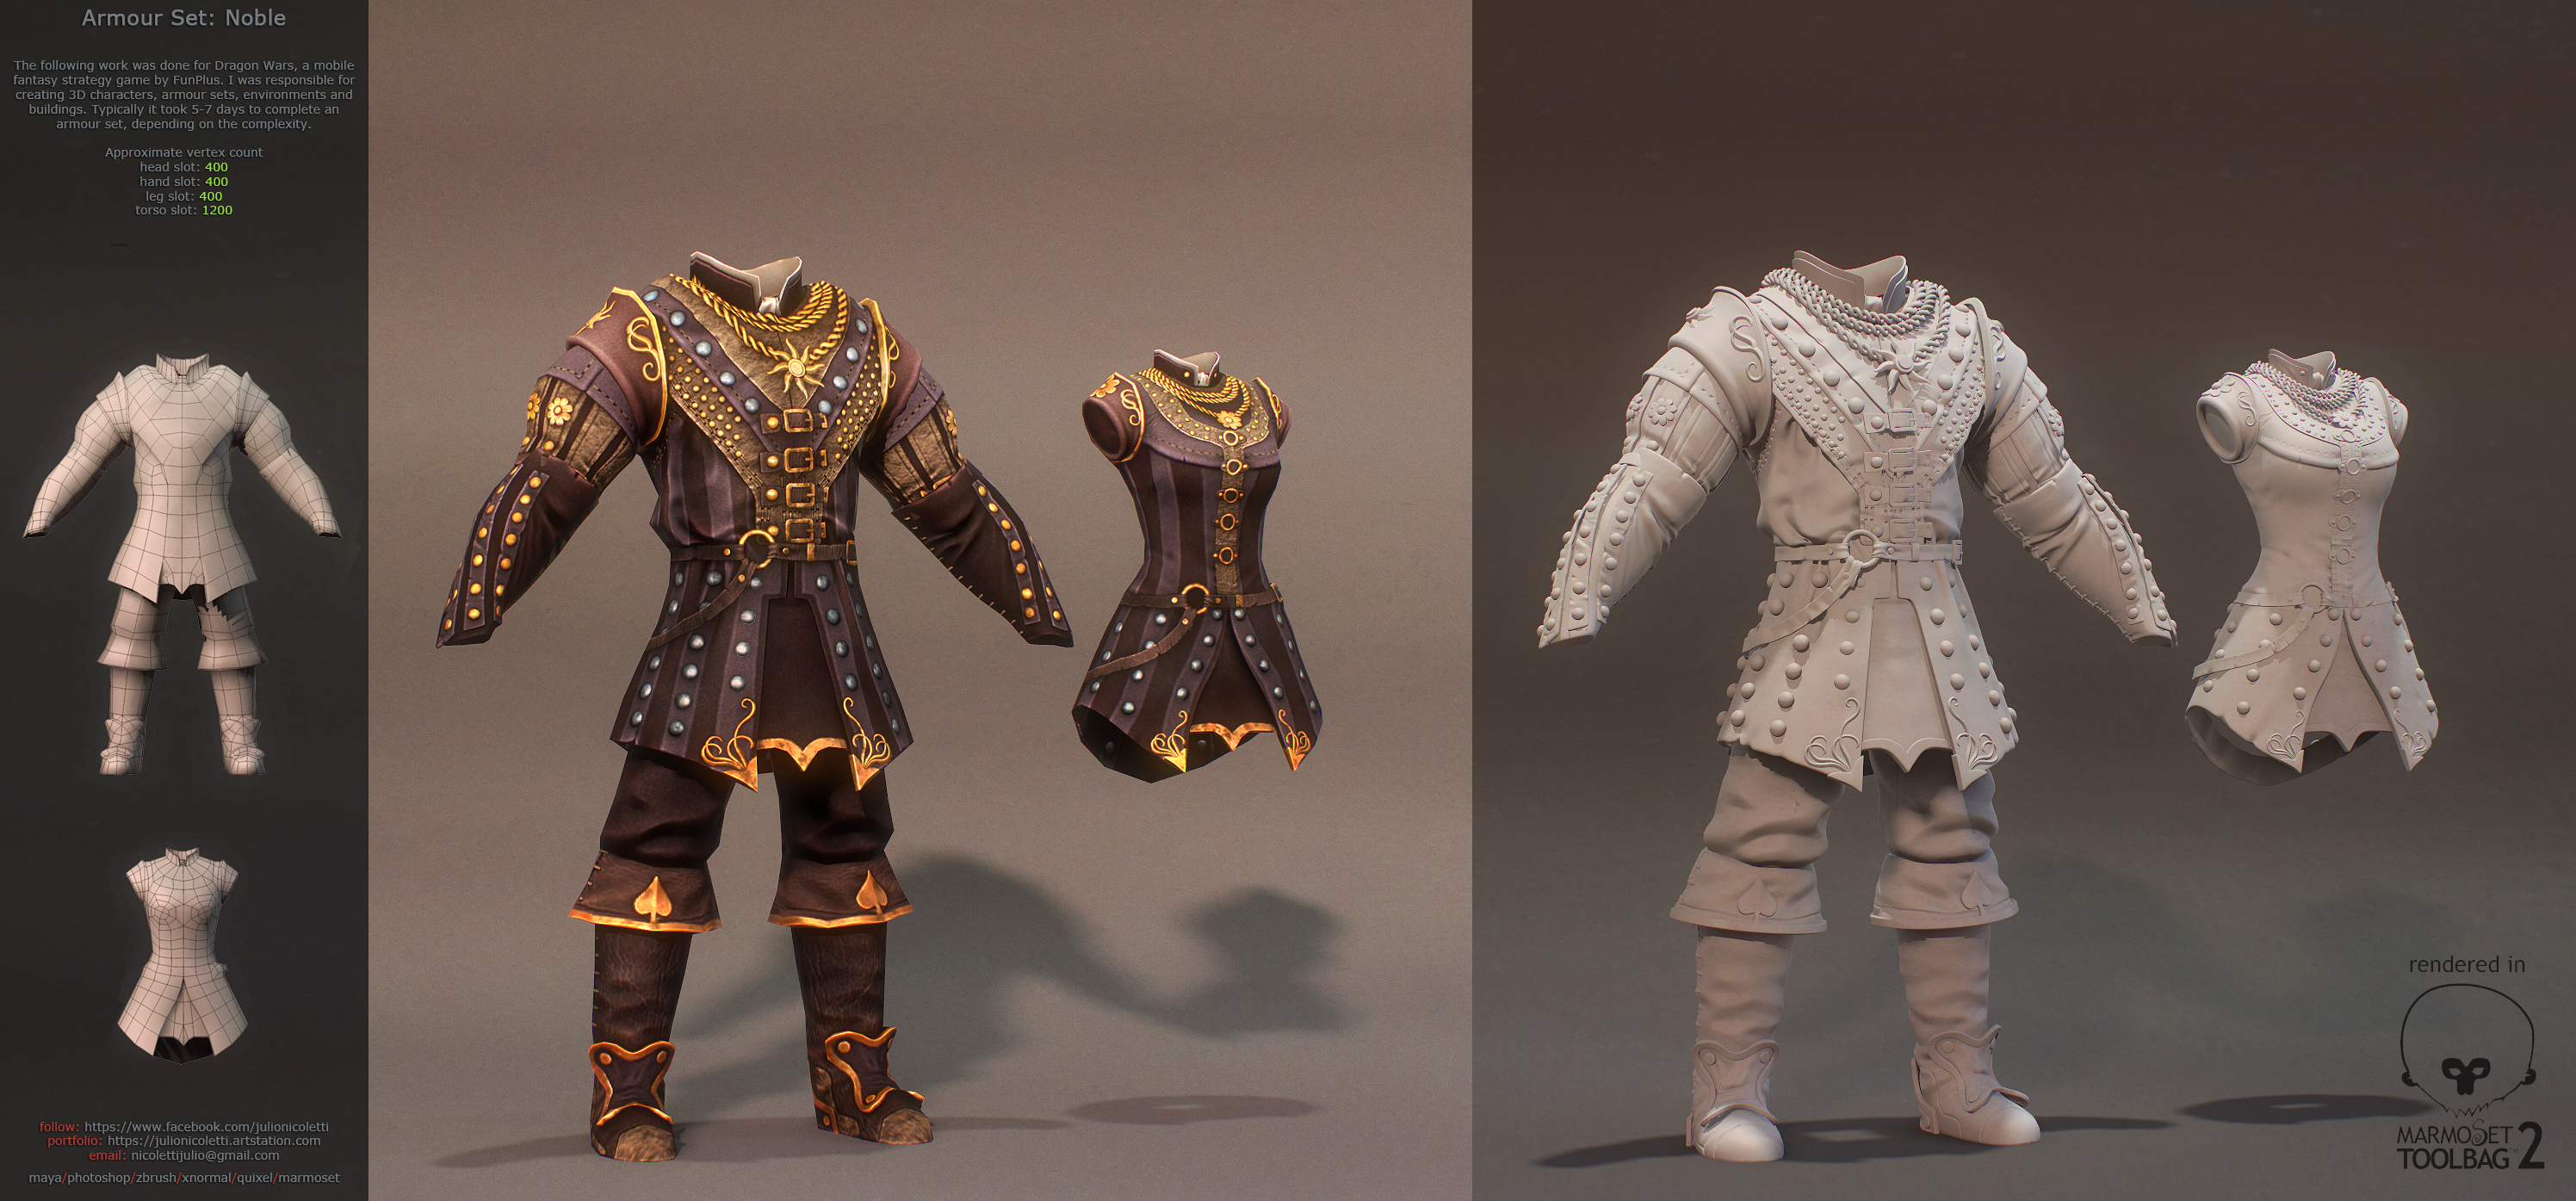 armour_set__noble_by_julionicoletti-d942aba.png